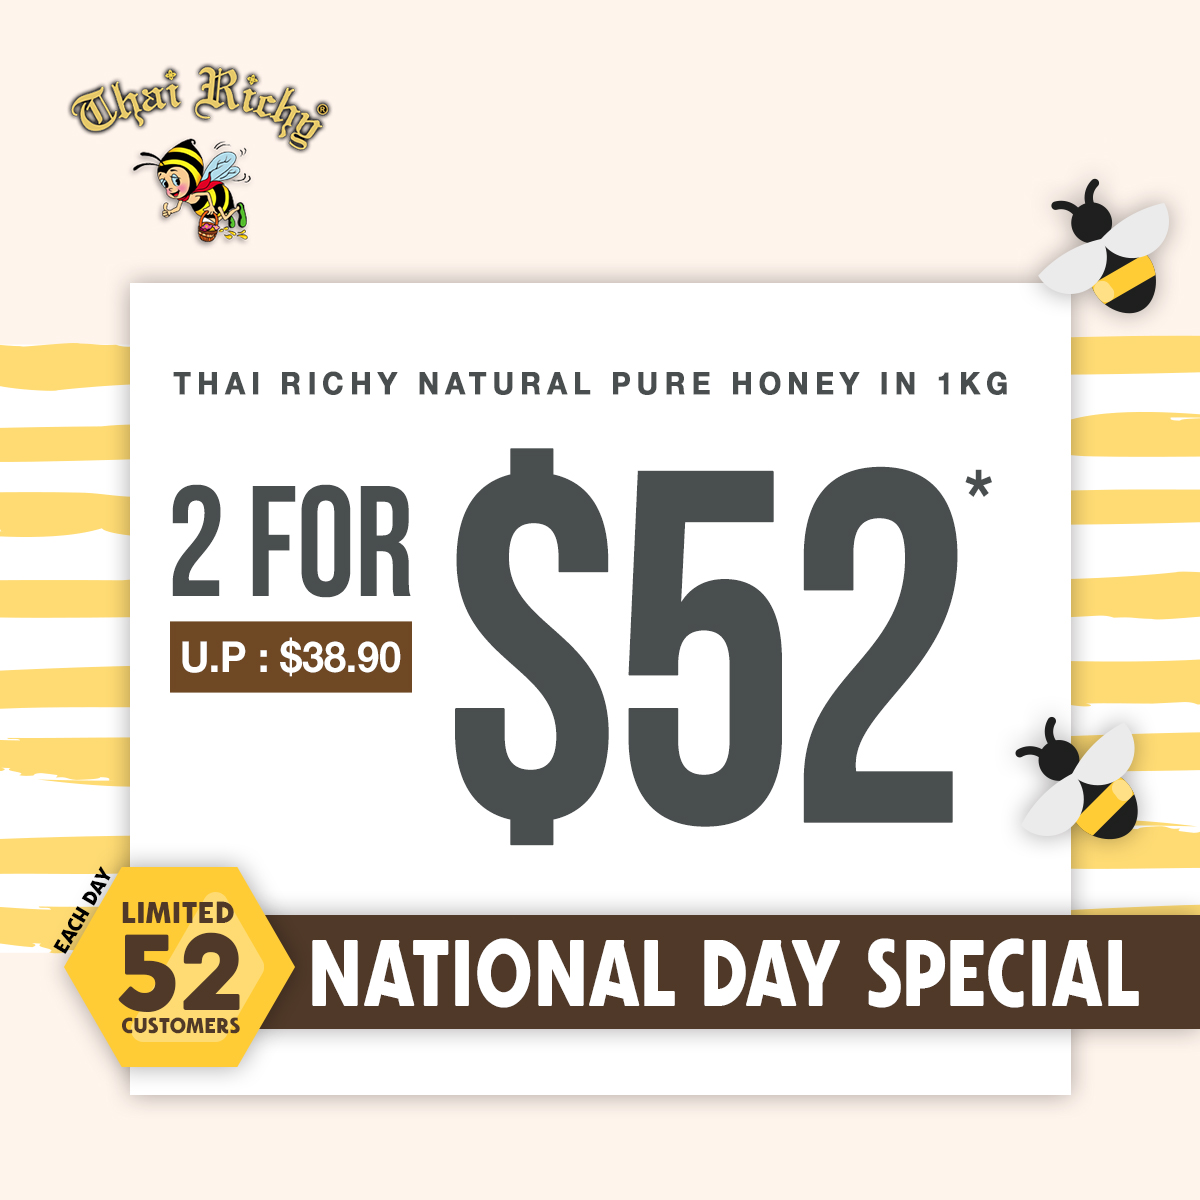 Thai Richy Natural Honey in 1KG Promotion